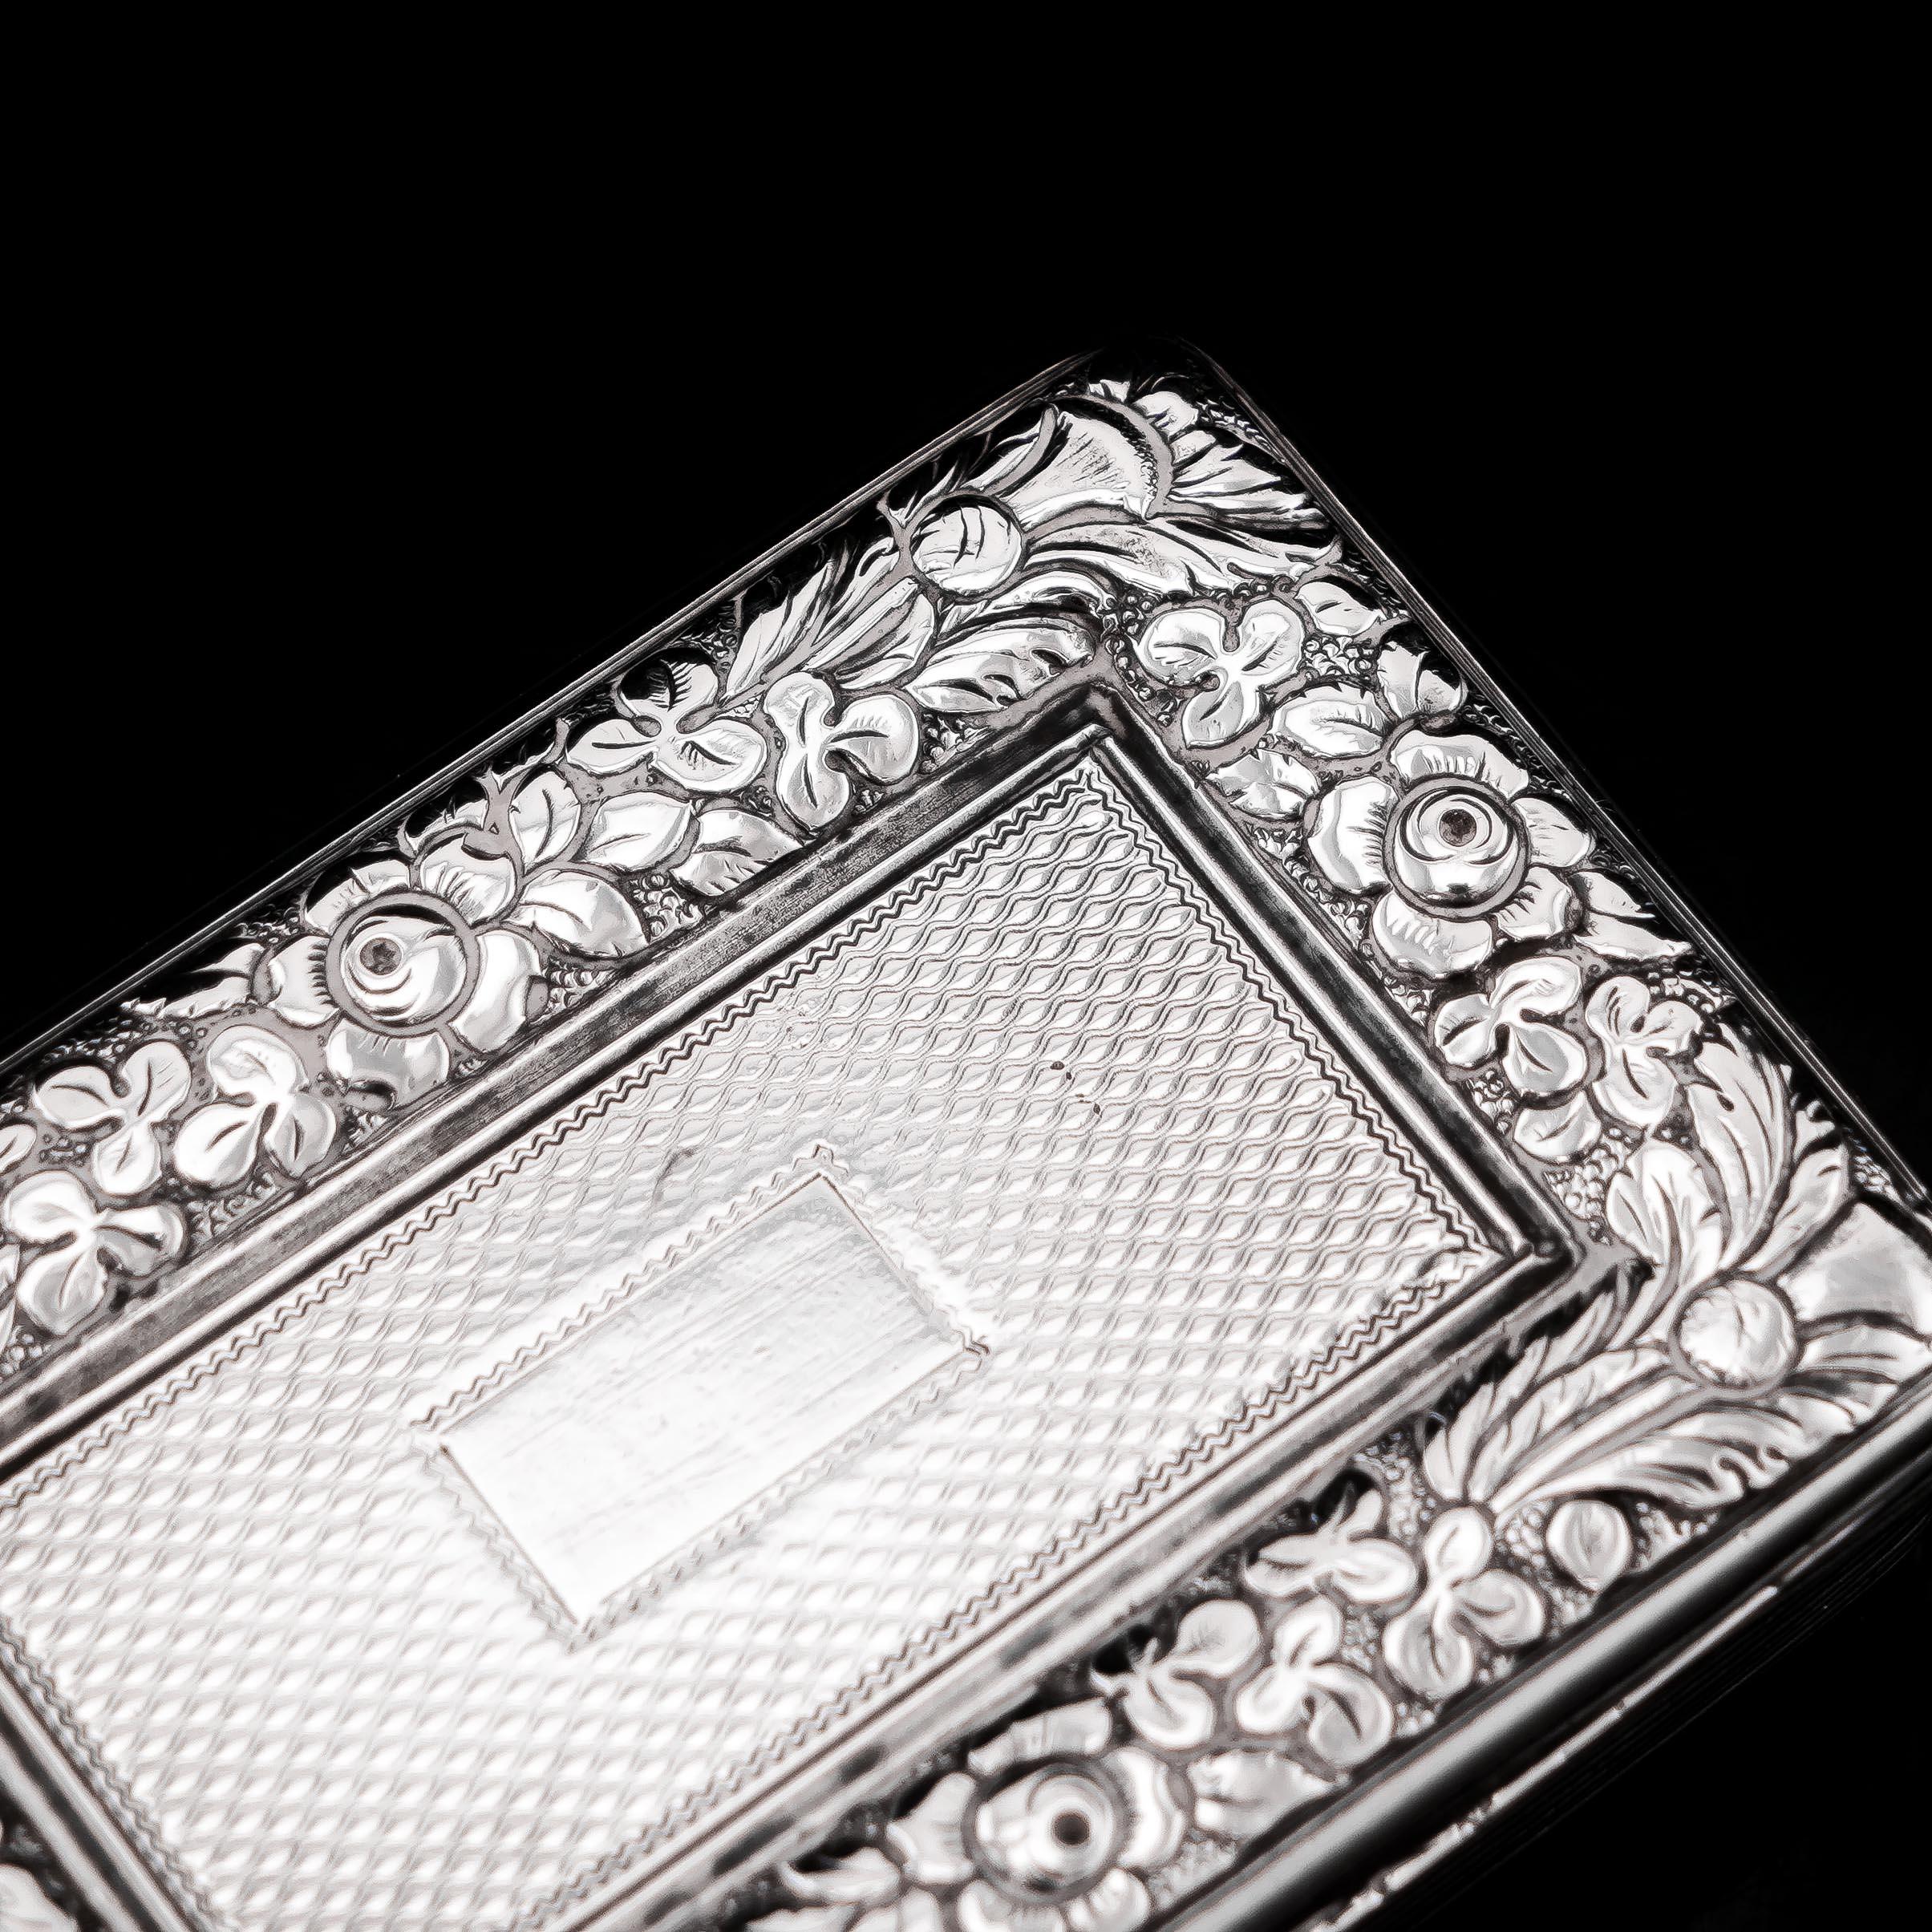 Antique Georgian Silver Snuff Box with Floral Border - Thomas Wilkes Barker 1824 6